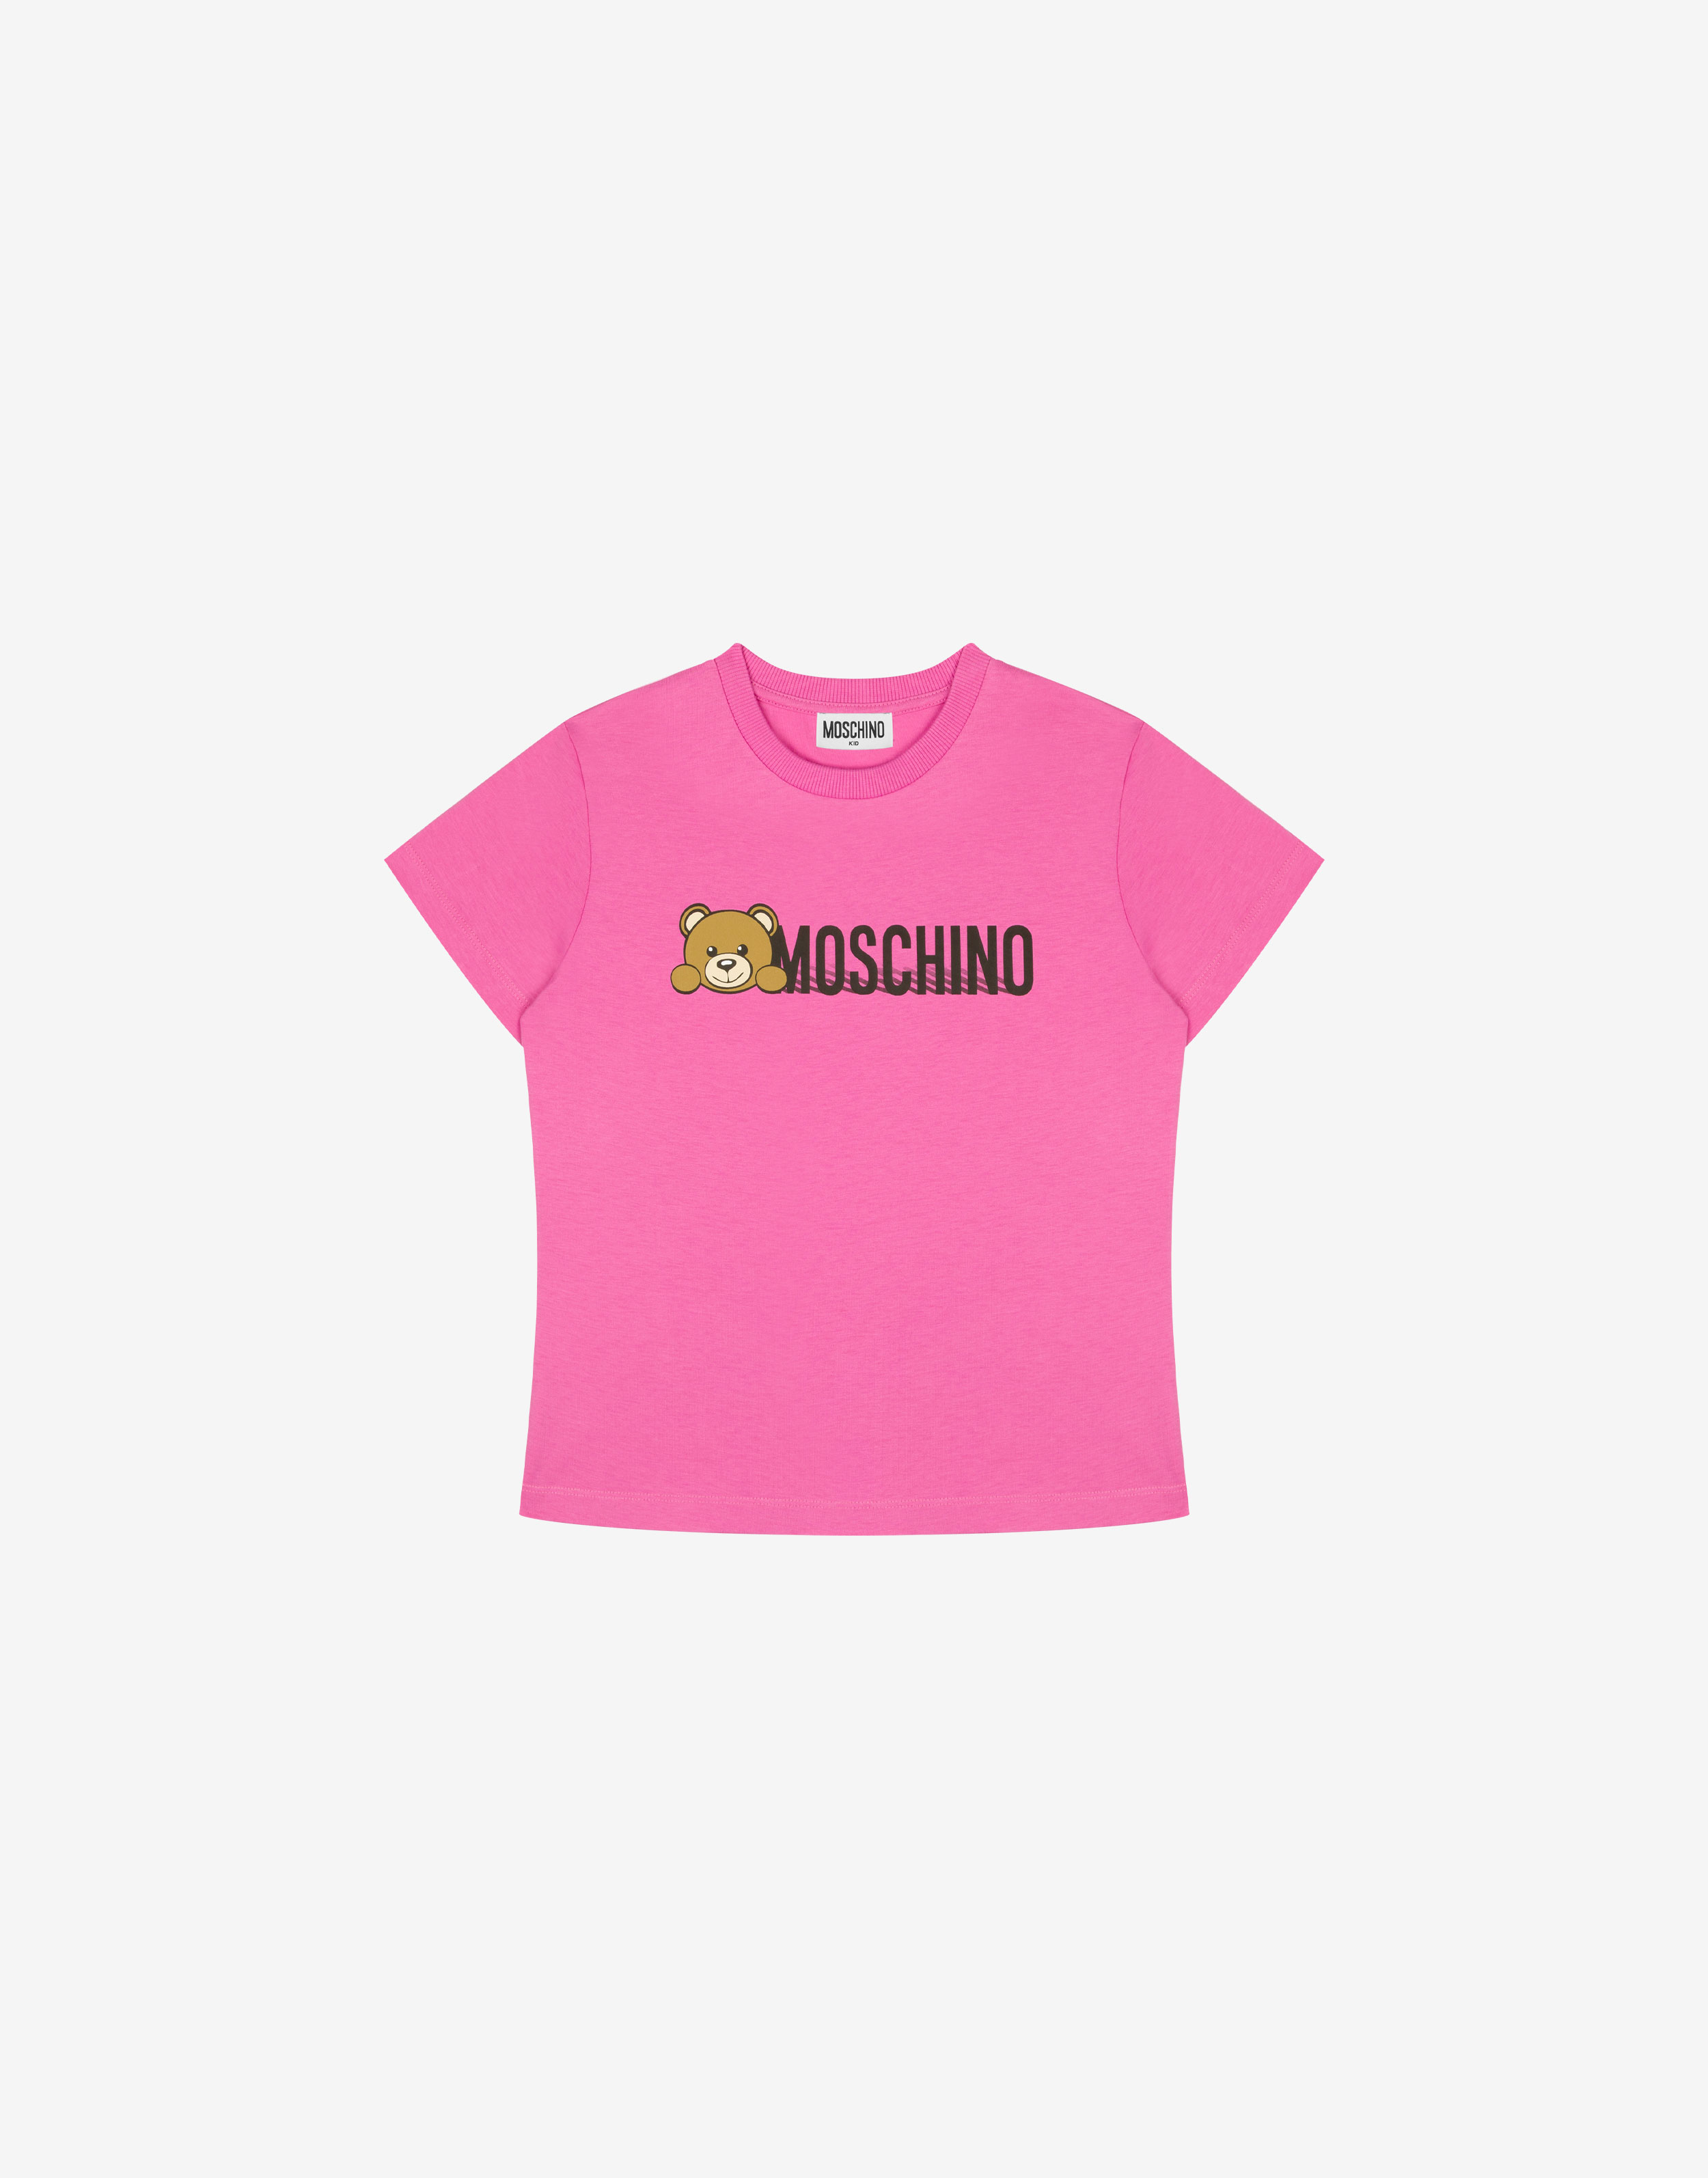 Moschino Boy for Child - Official Store